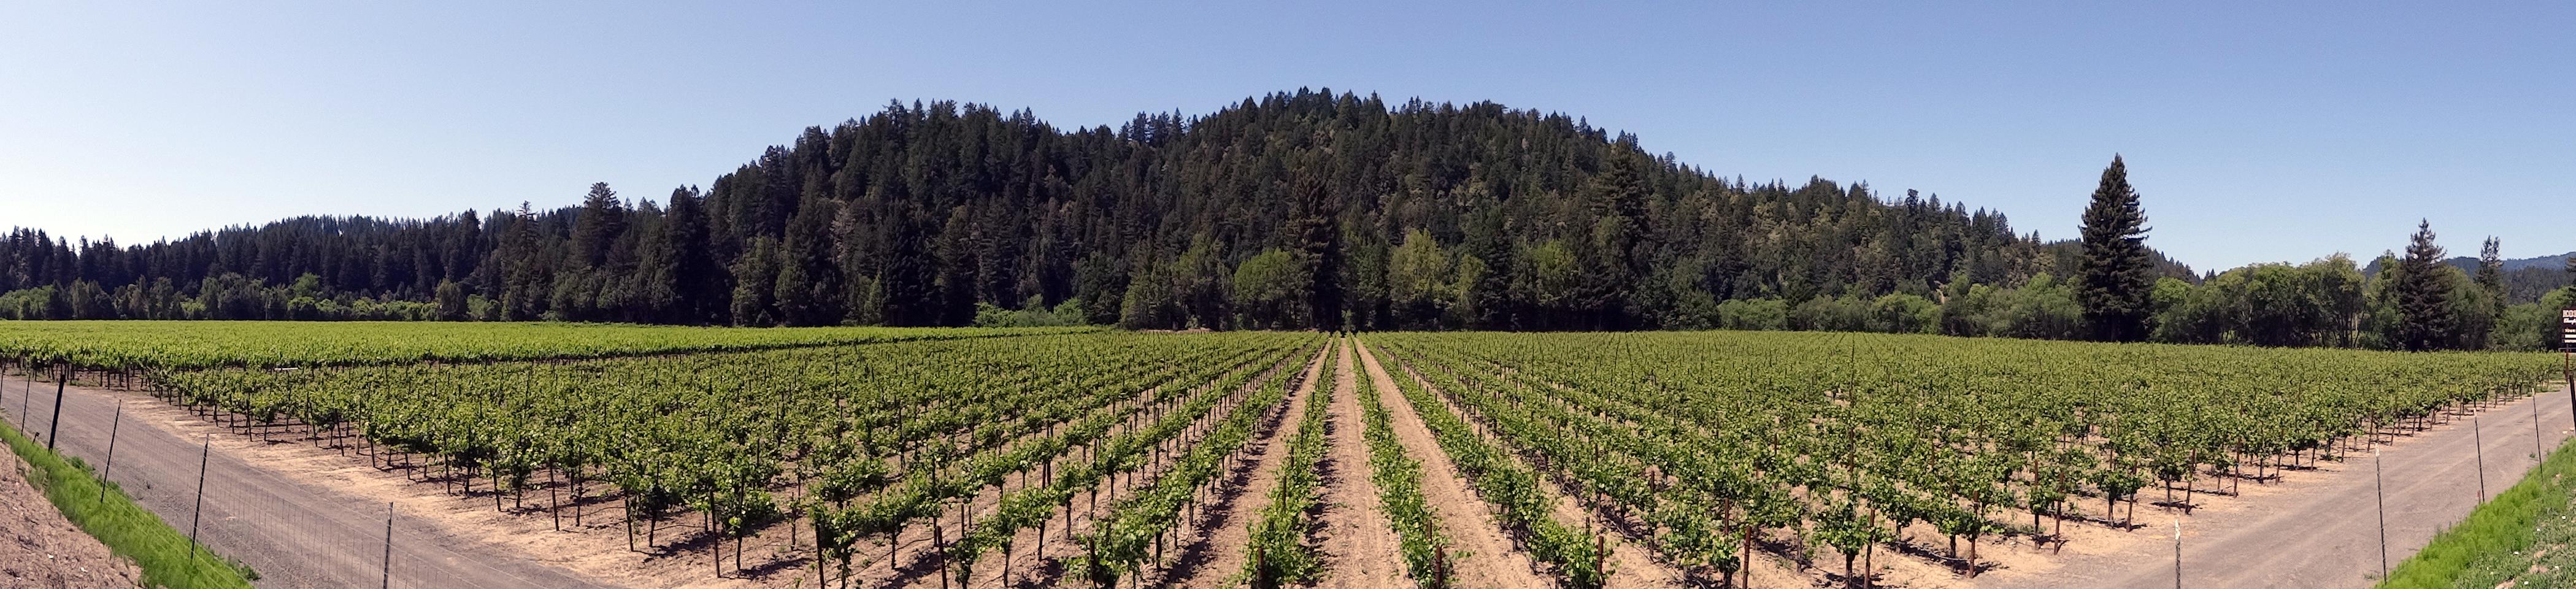 One of the Korbel fields in the Russian River Valley. (Wide)